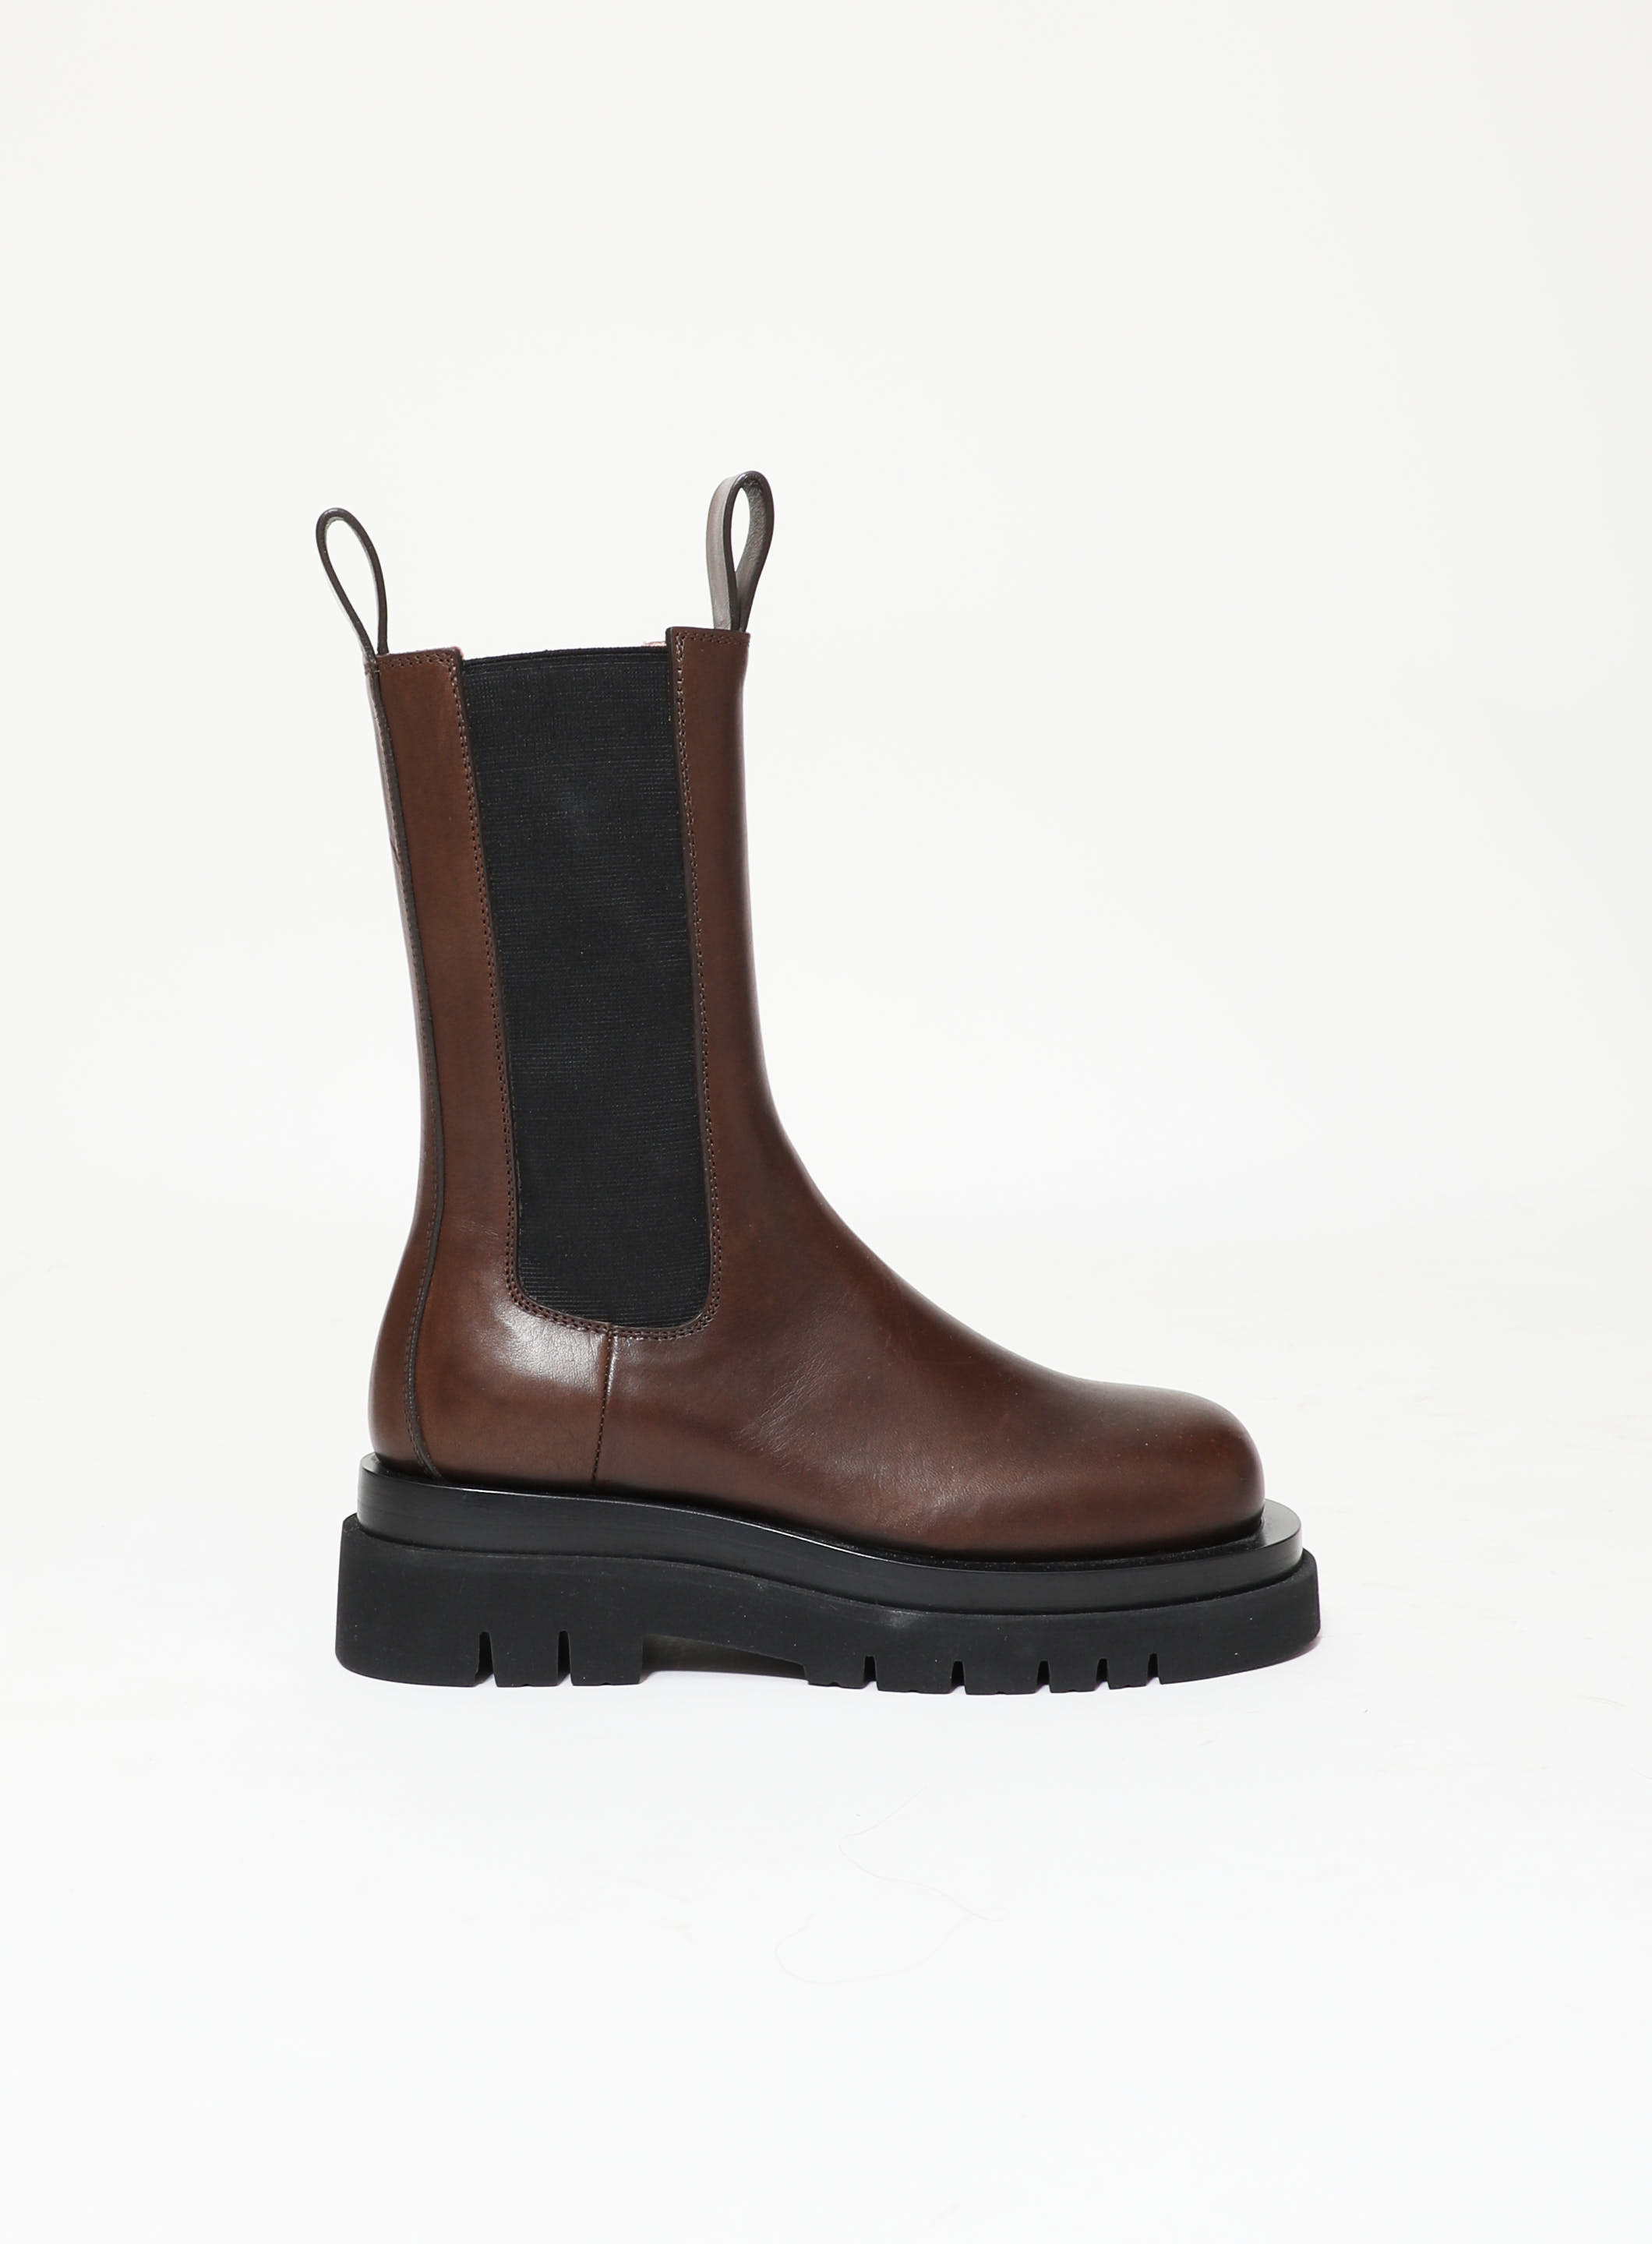 Pre-Fall 2020 BV Tire Chelsea Boots, Authentic & Vintage